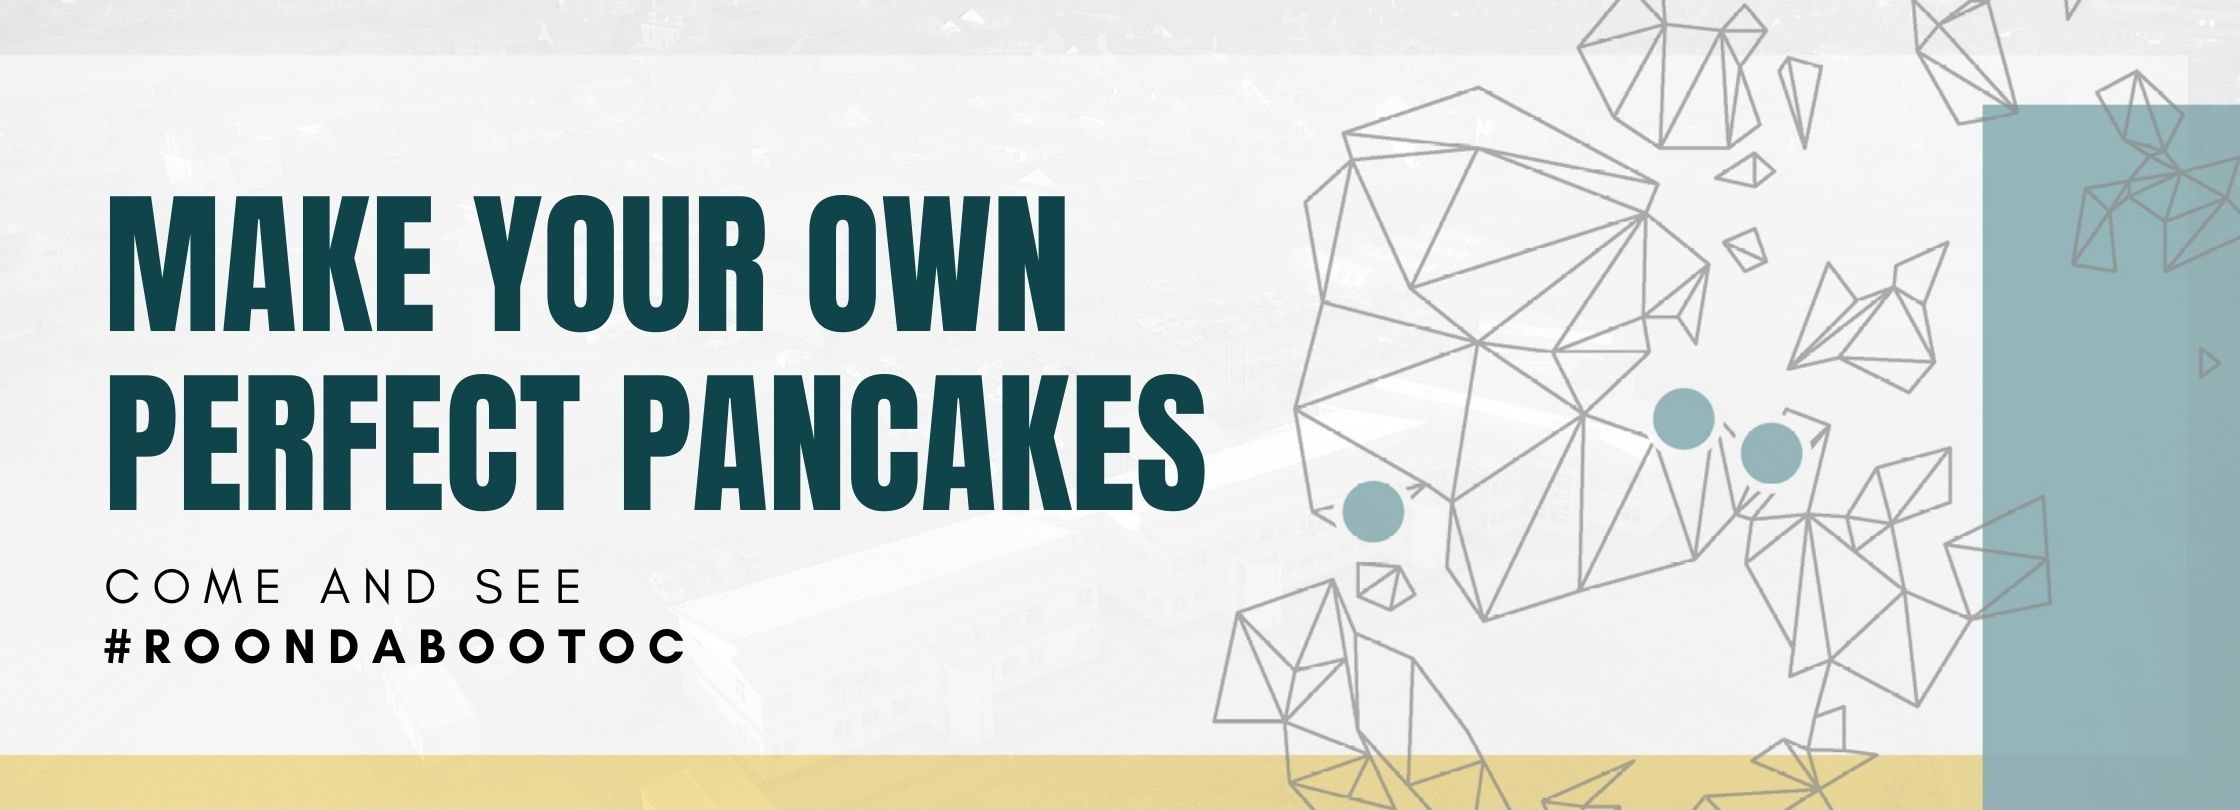 Make your own perfect pancakes | Come and see | roondabootoc